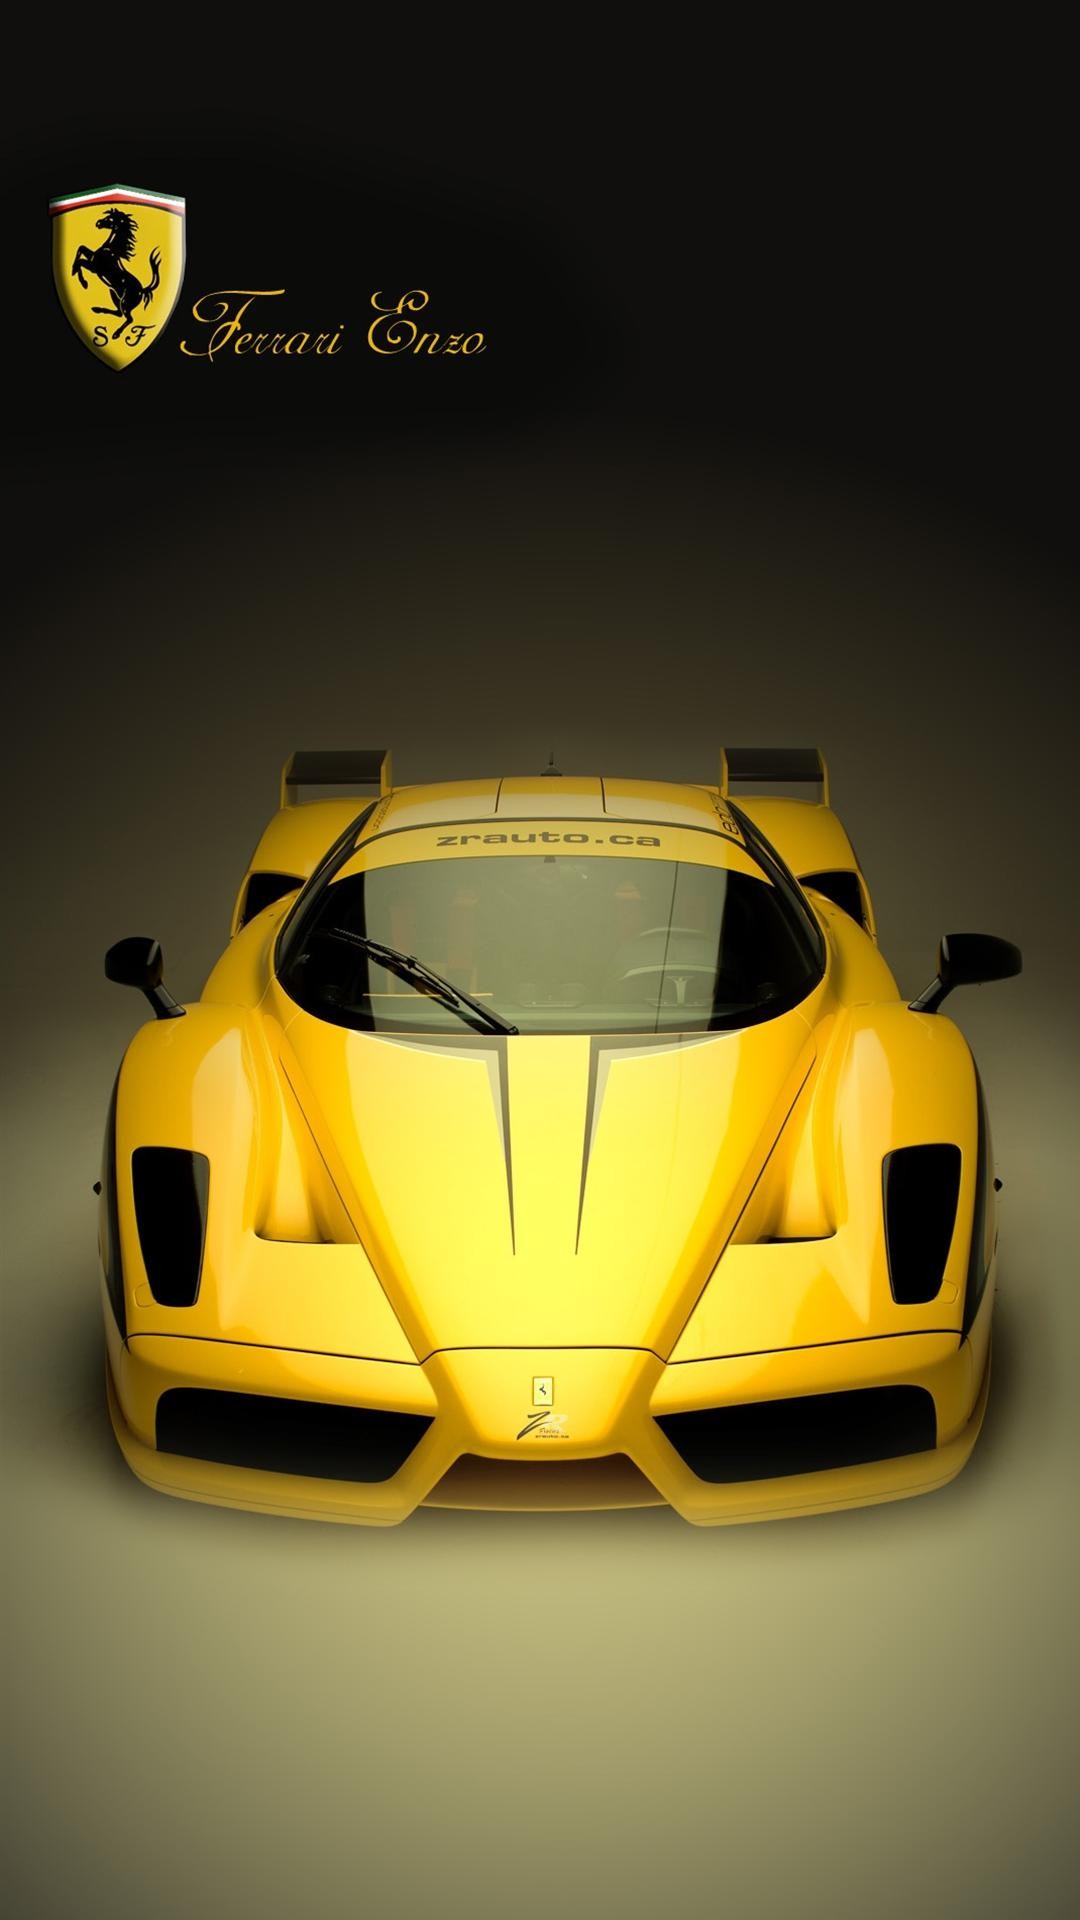 Ferrari enzo k wallpapers free and easy to download